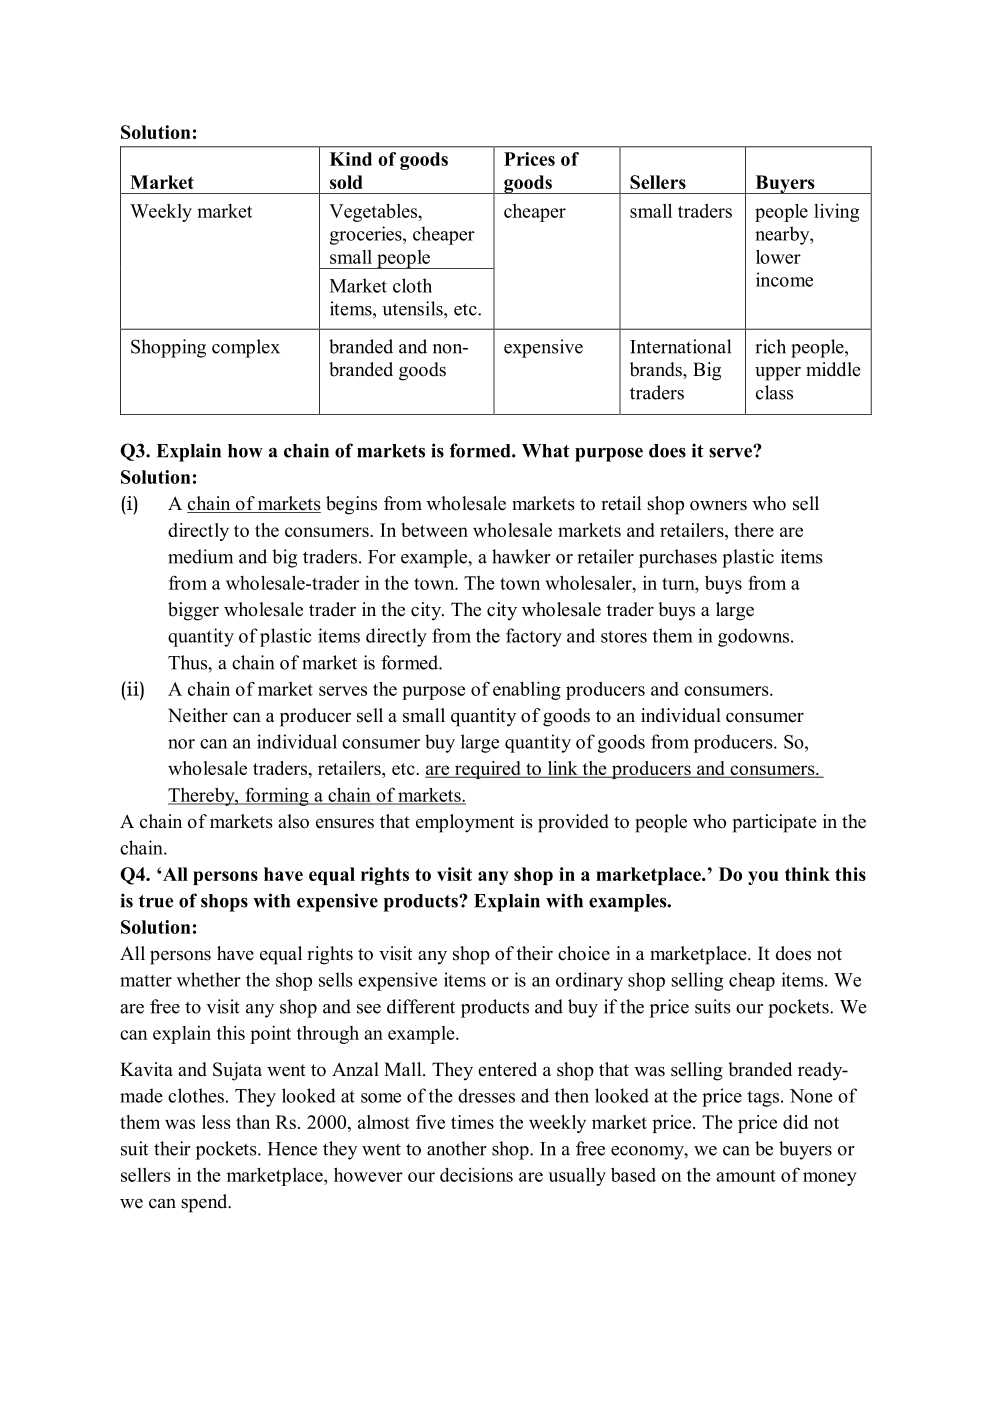 NCERT Solutions For Class 7 social science social and political life chapter 8